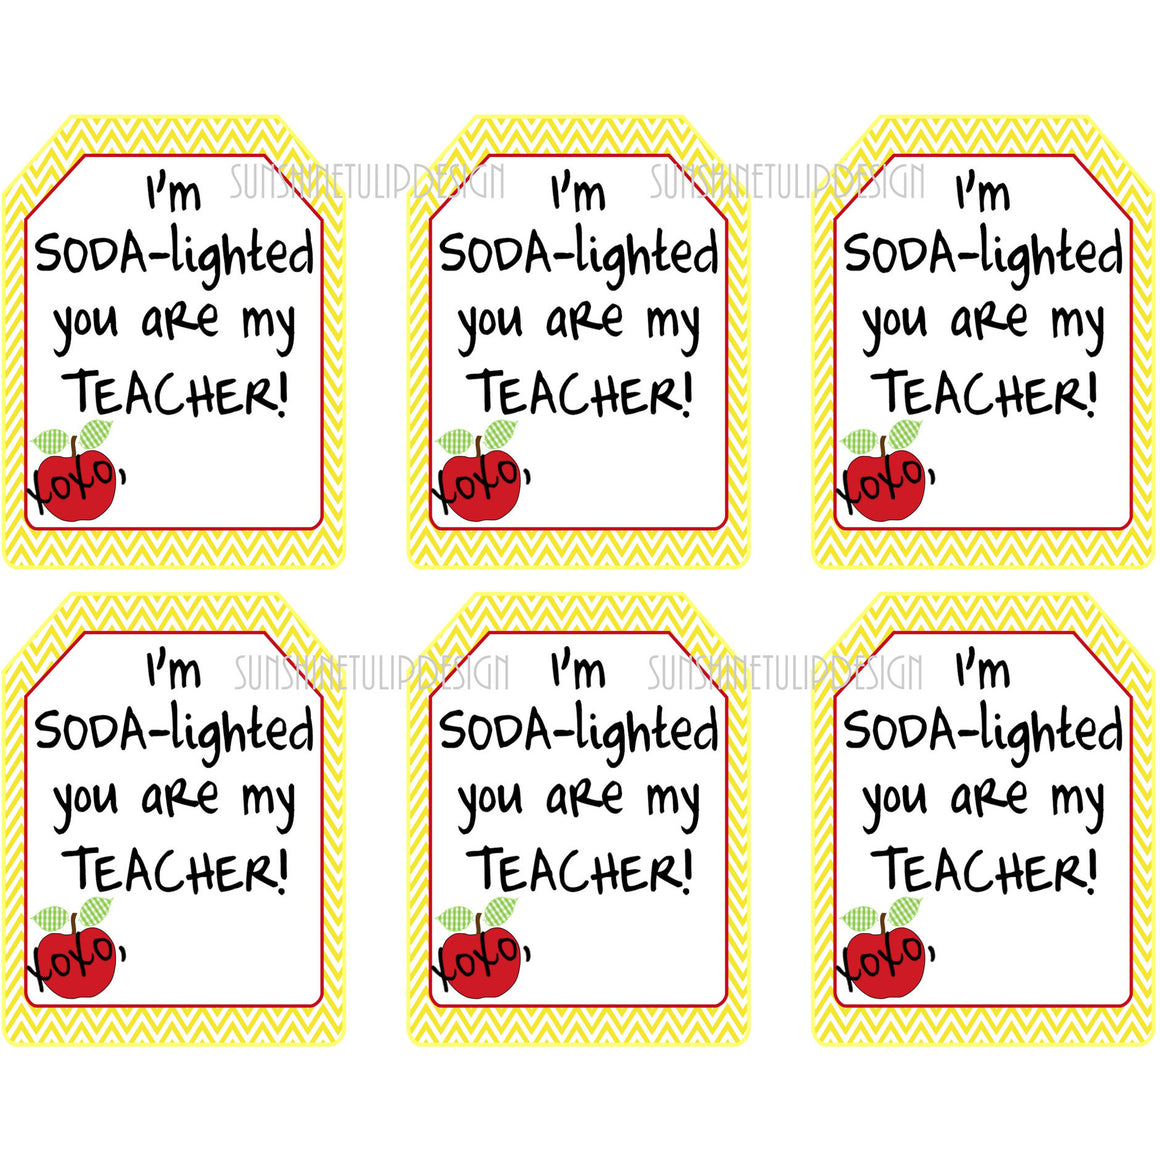 Printable Teacher Appreciation Gift Tags, SODA-lighted You are My Teacher Gift Tags by SUNSHINETULIPDESIGN - Sunshinetulipdesign